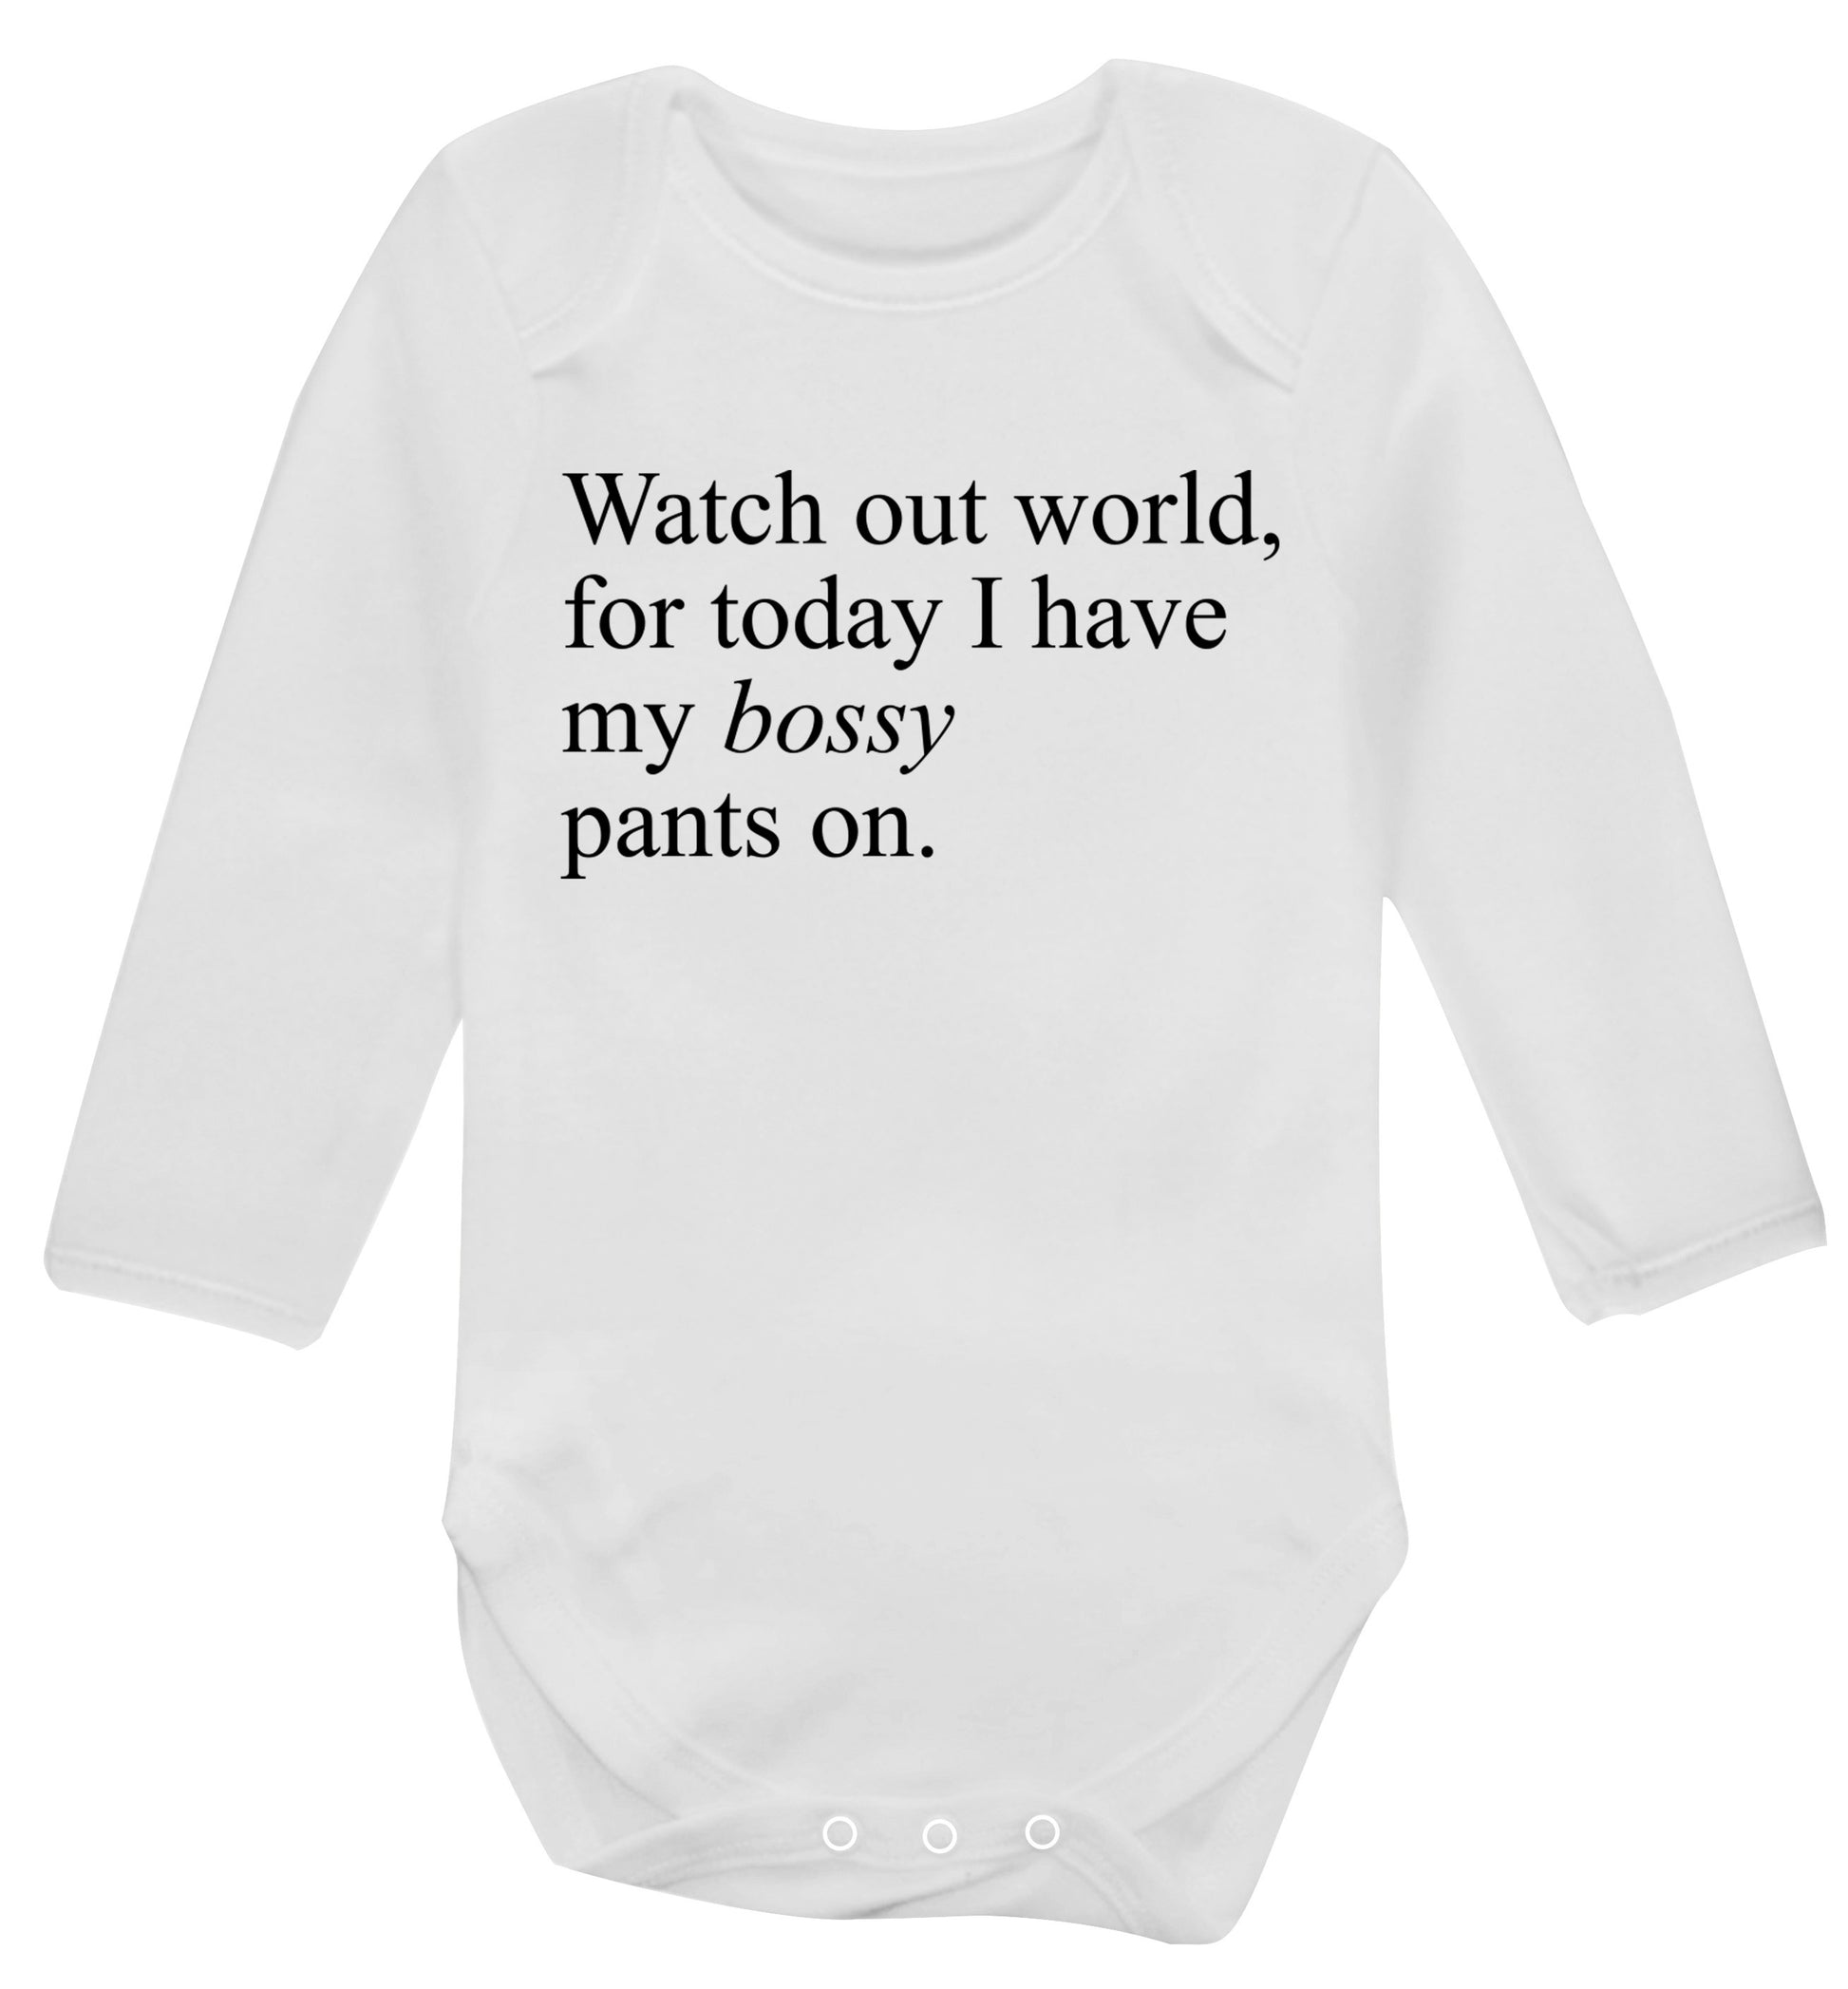 Watch out world, for today I have my bossy pants on Baby Vest long sleeved white 6-12 months